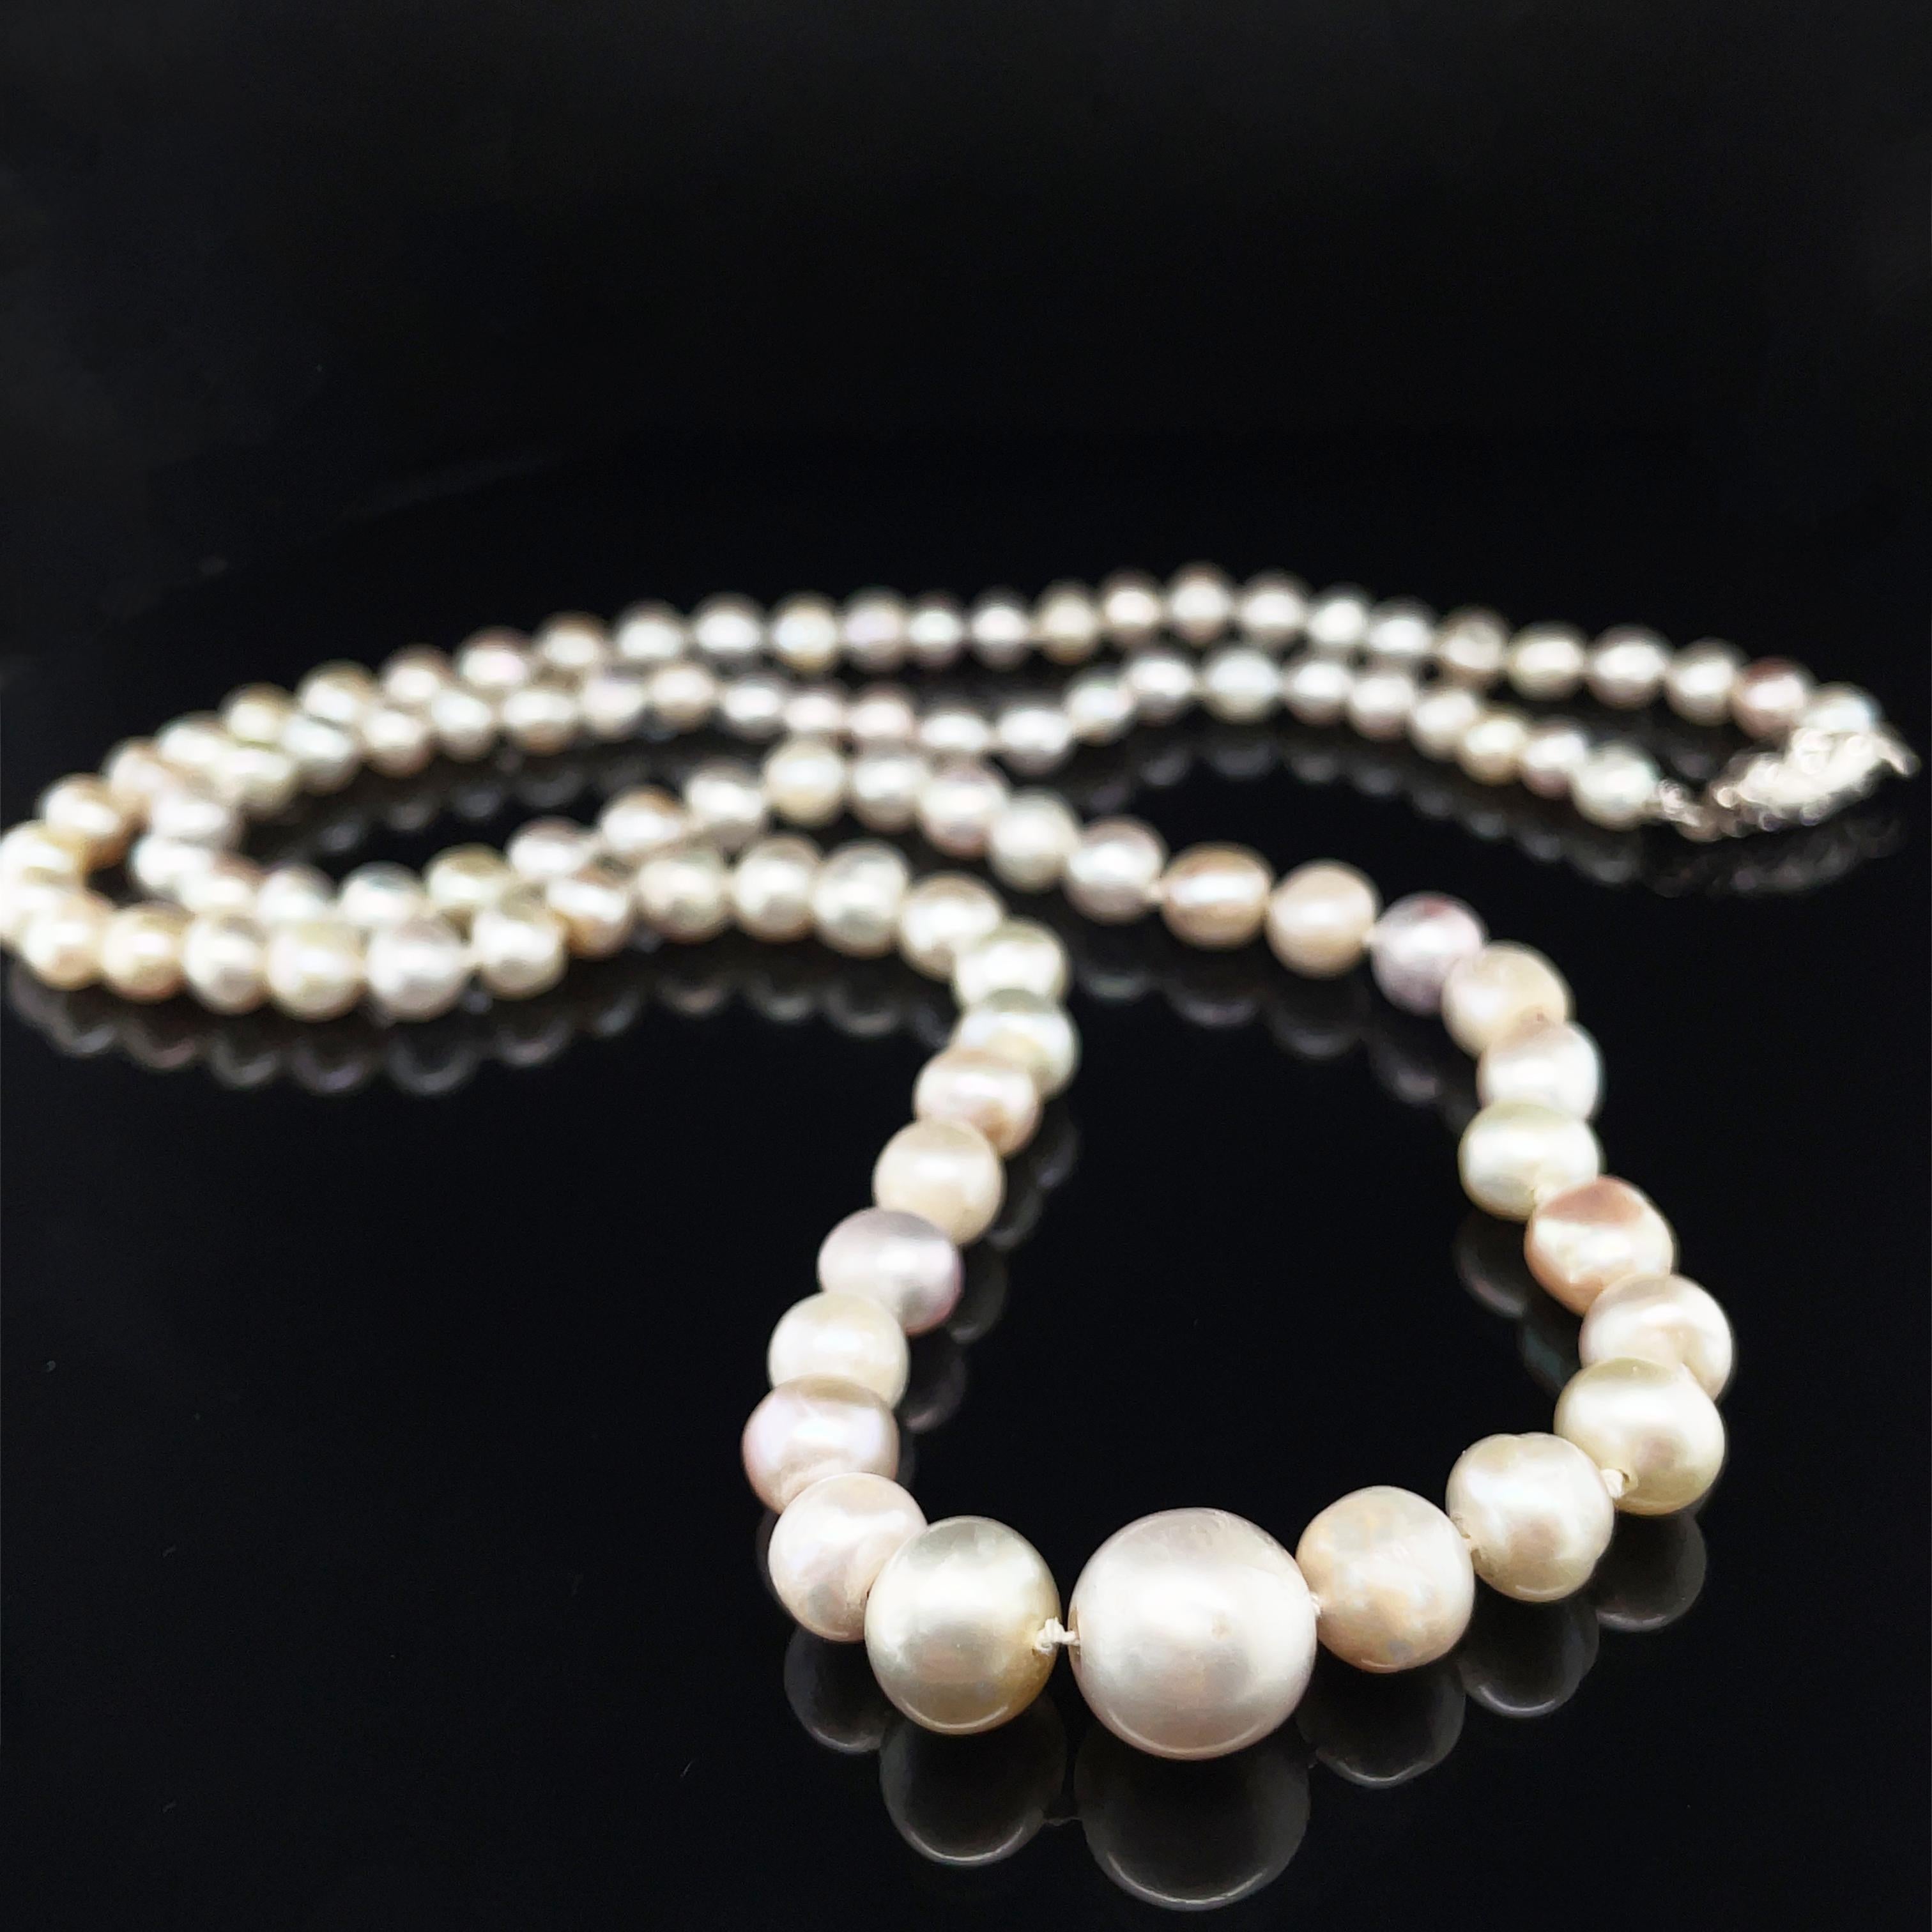 Large Natural Saltwater Pearl and Diamond Necklace

A beautiful large natural pearl (saltwater) and diamond necklace, consisting of ninety-five natural saltwater pearls ranging from 9.2 to 4mm. Mounted with a diamond clasp in 18k white gold.

The